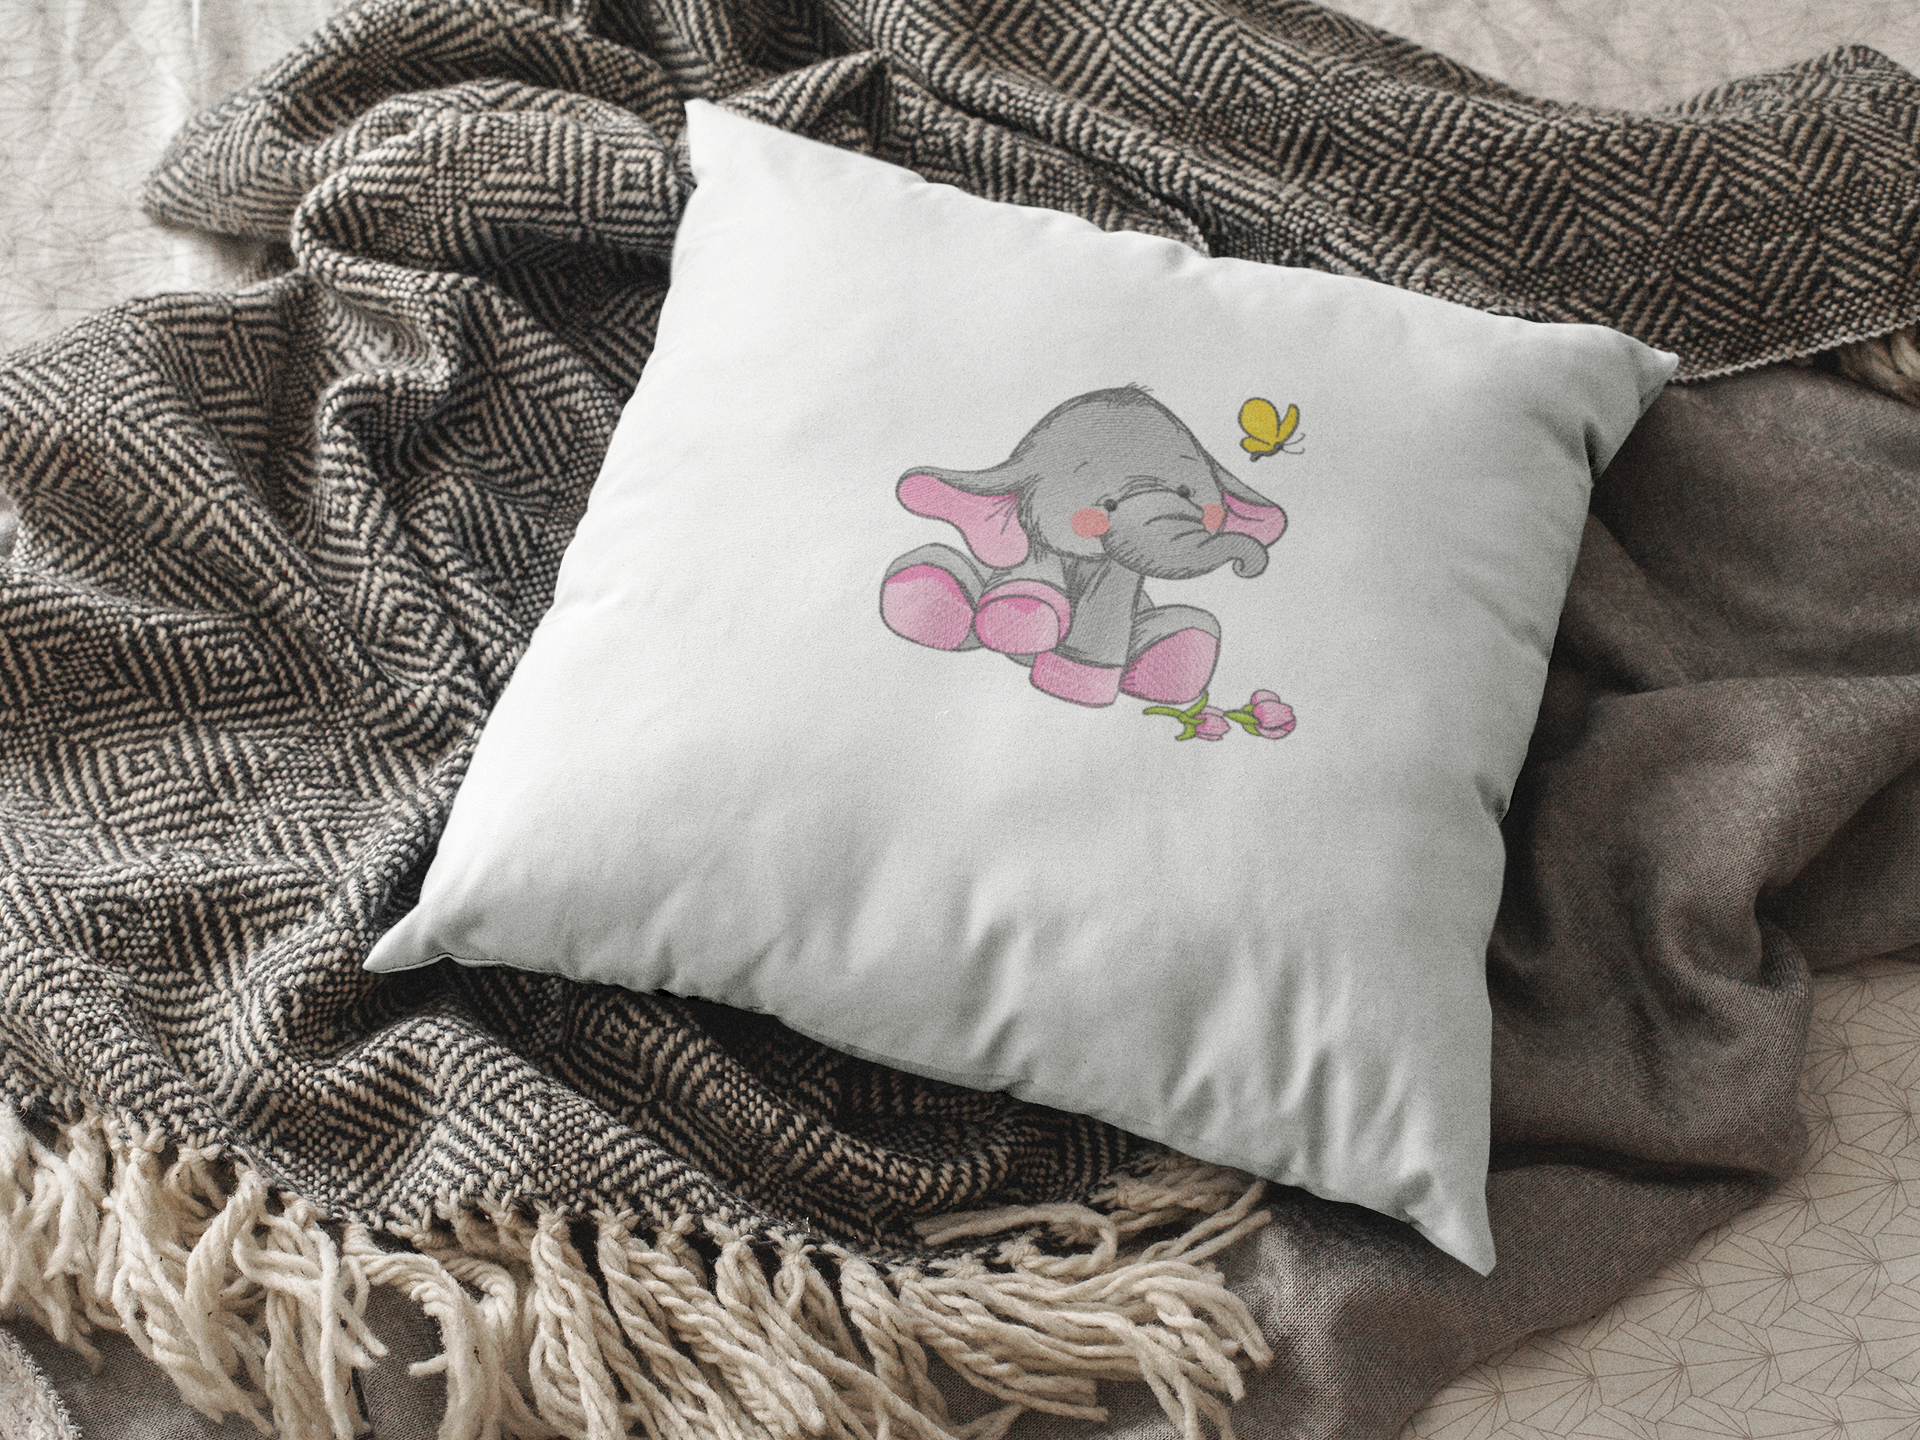 Embroidered cushion with Funny elephant design